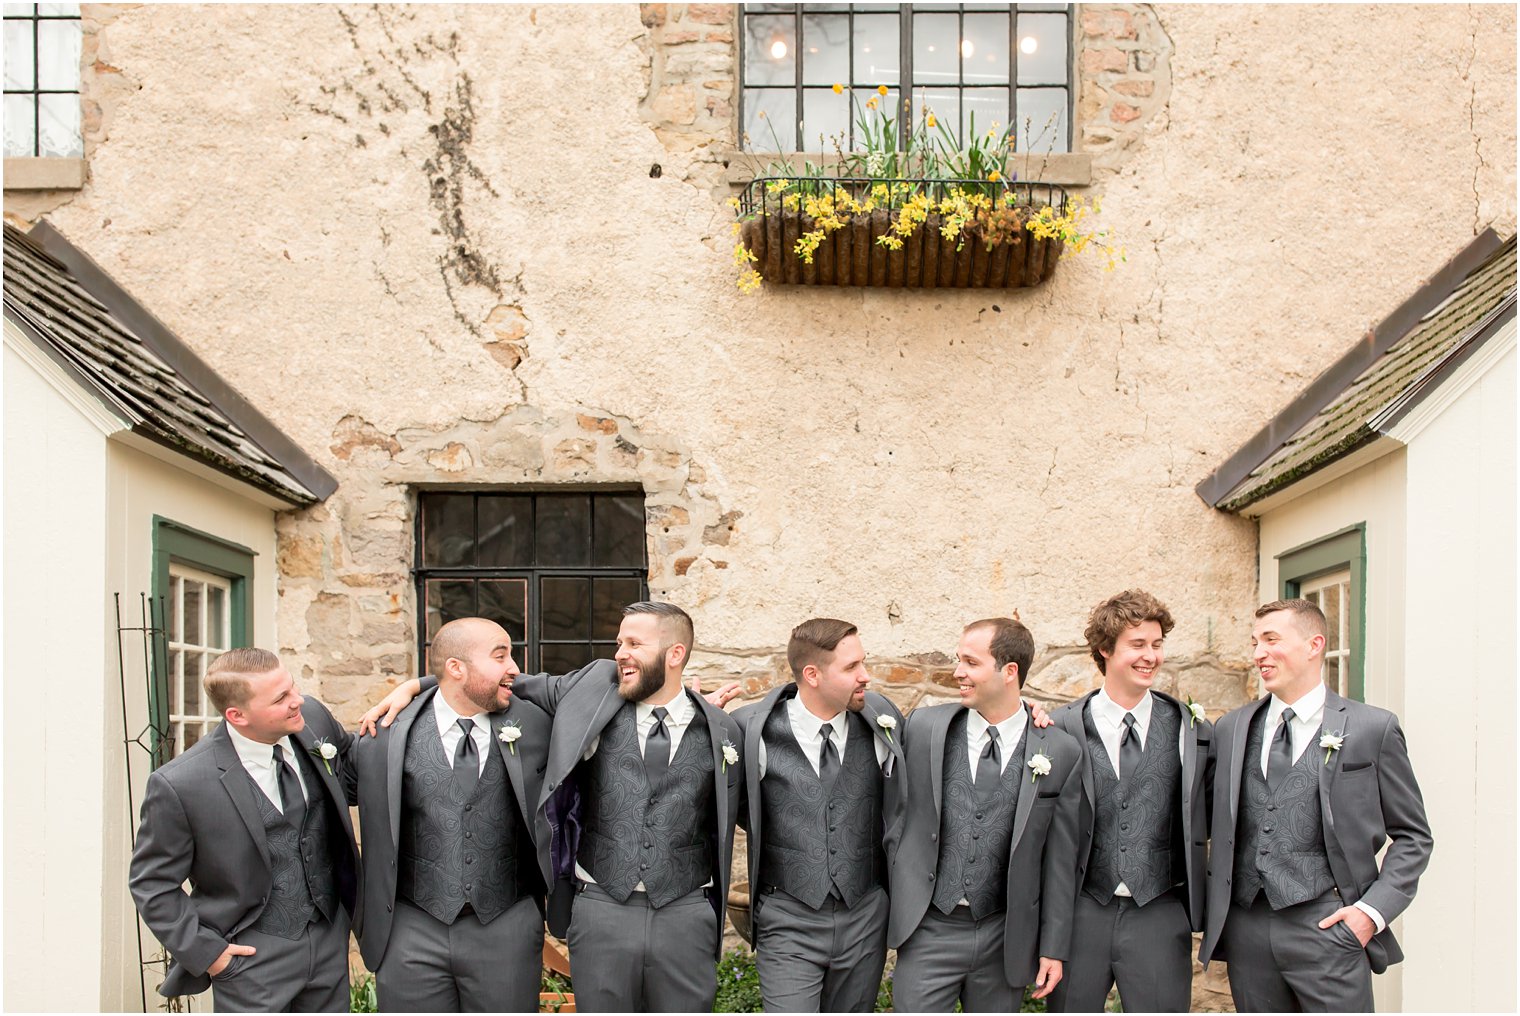 Groomsman wearing boutonnieres from Pod Shop Flowers in New Hope, PA | Photo by PA Wedding Photographers Idalia Photography